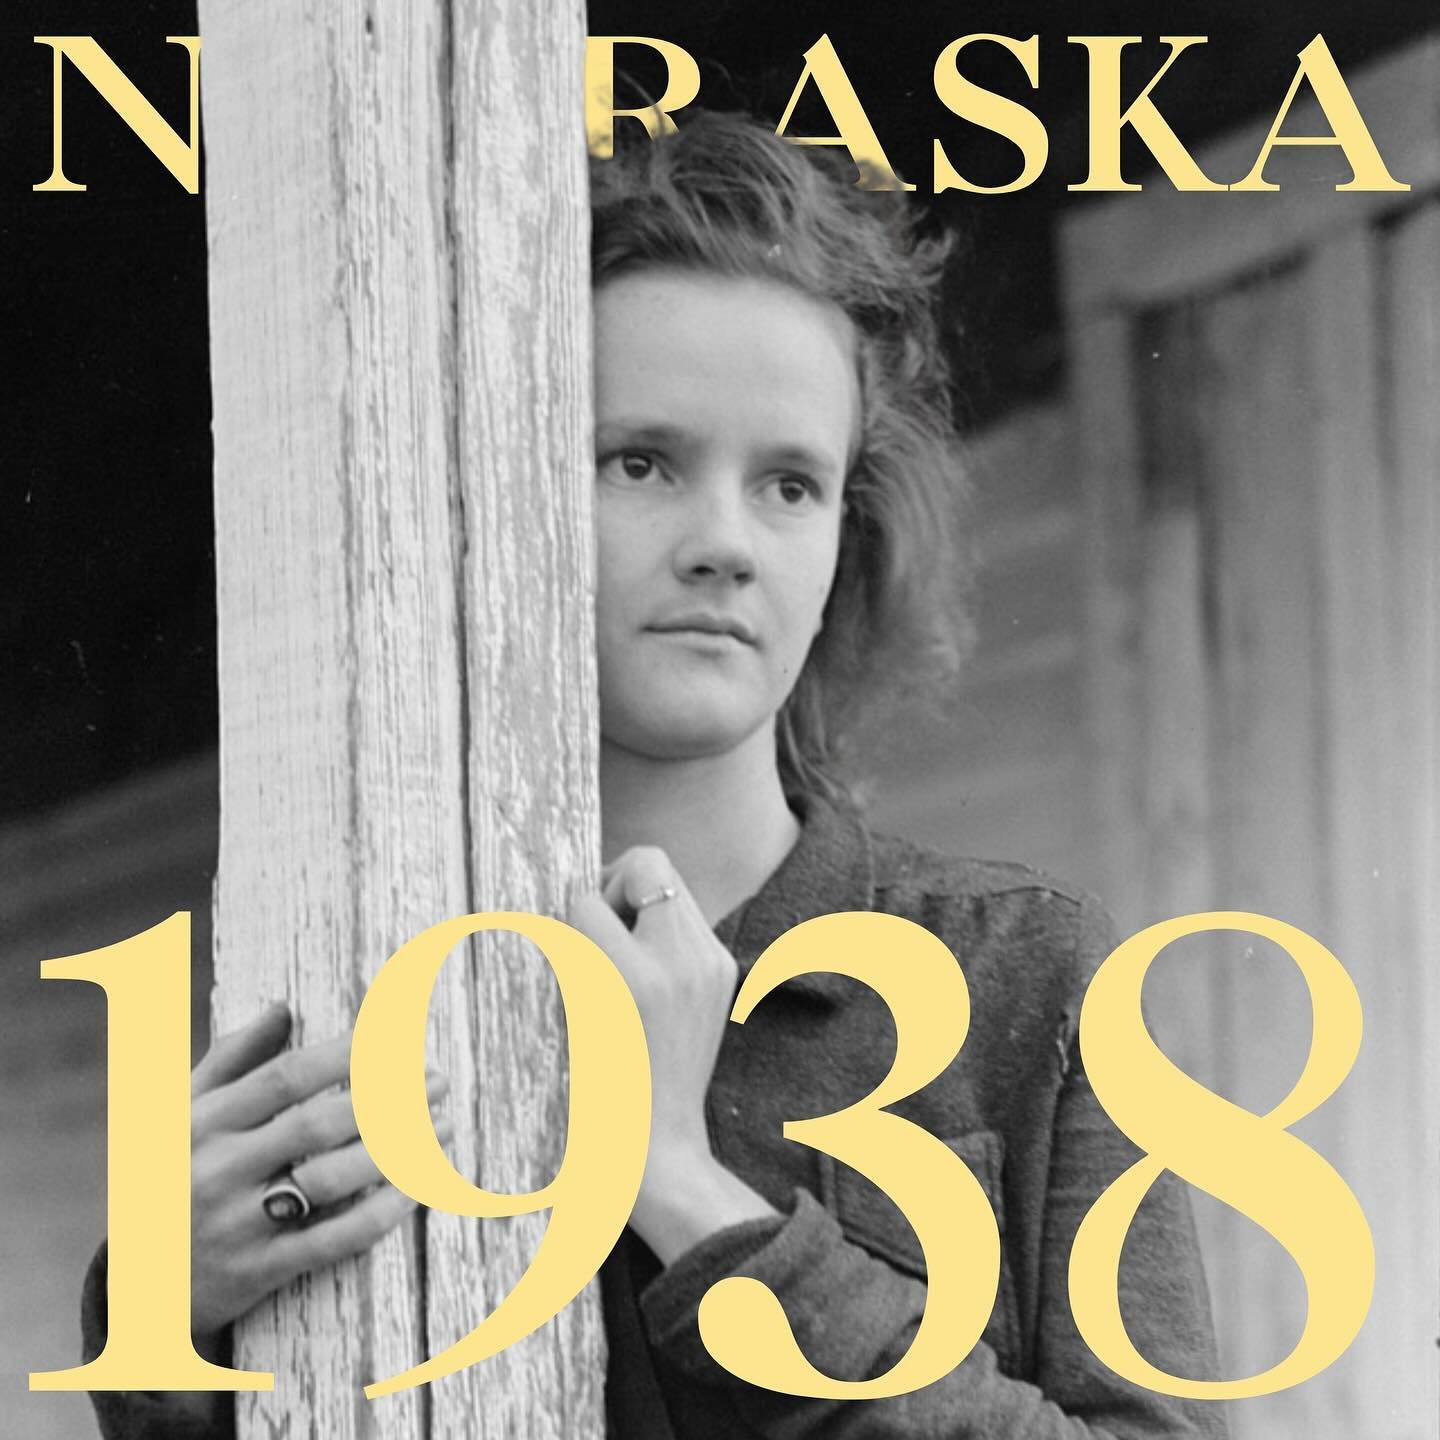 I have a new song! It&rsquo;s called &ldquo;Nebraska, 1938.&rdquo; My grandmother was born and raised on a farm in rural Nebraska, and this song is about a particular moment in her life. Links to listen in my bio

Pictured is an unknown girl in Louis